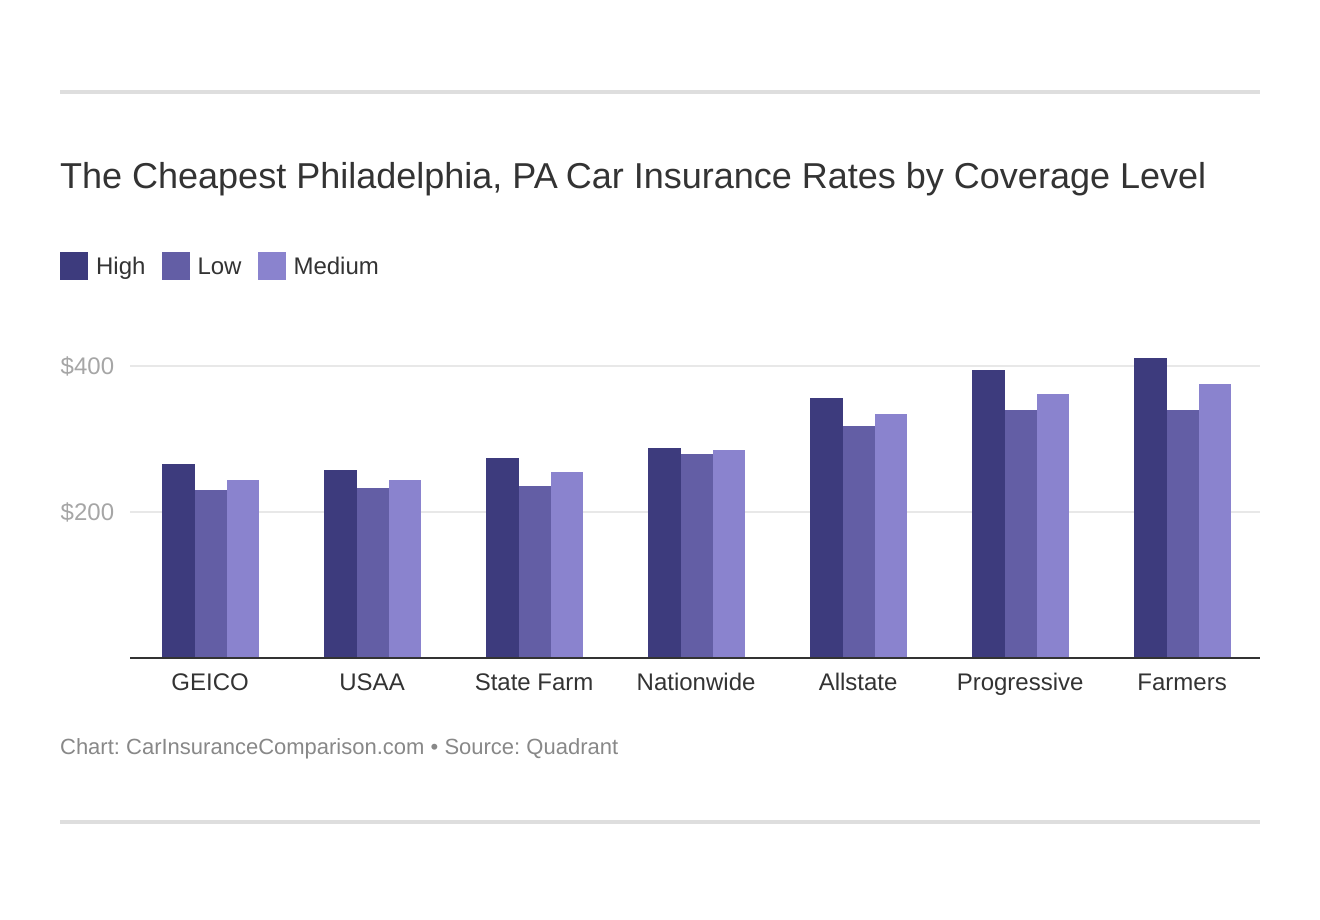 The Cheapest Philadelphia, PA Car Insurance Rates by Coverage Level